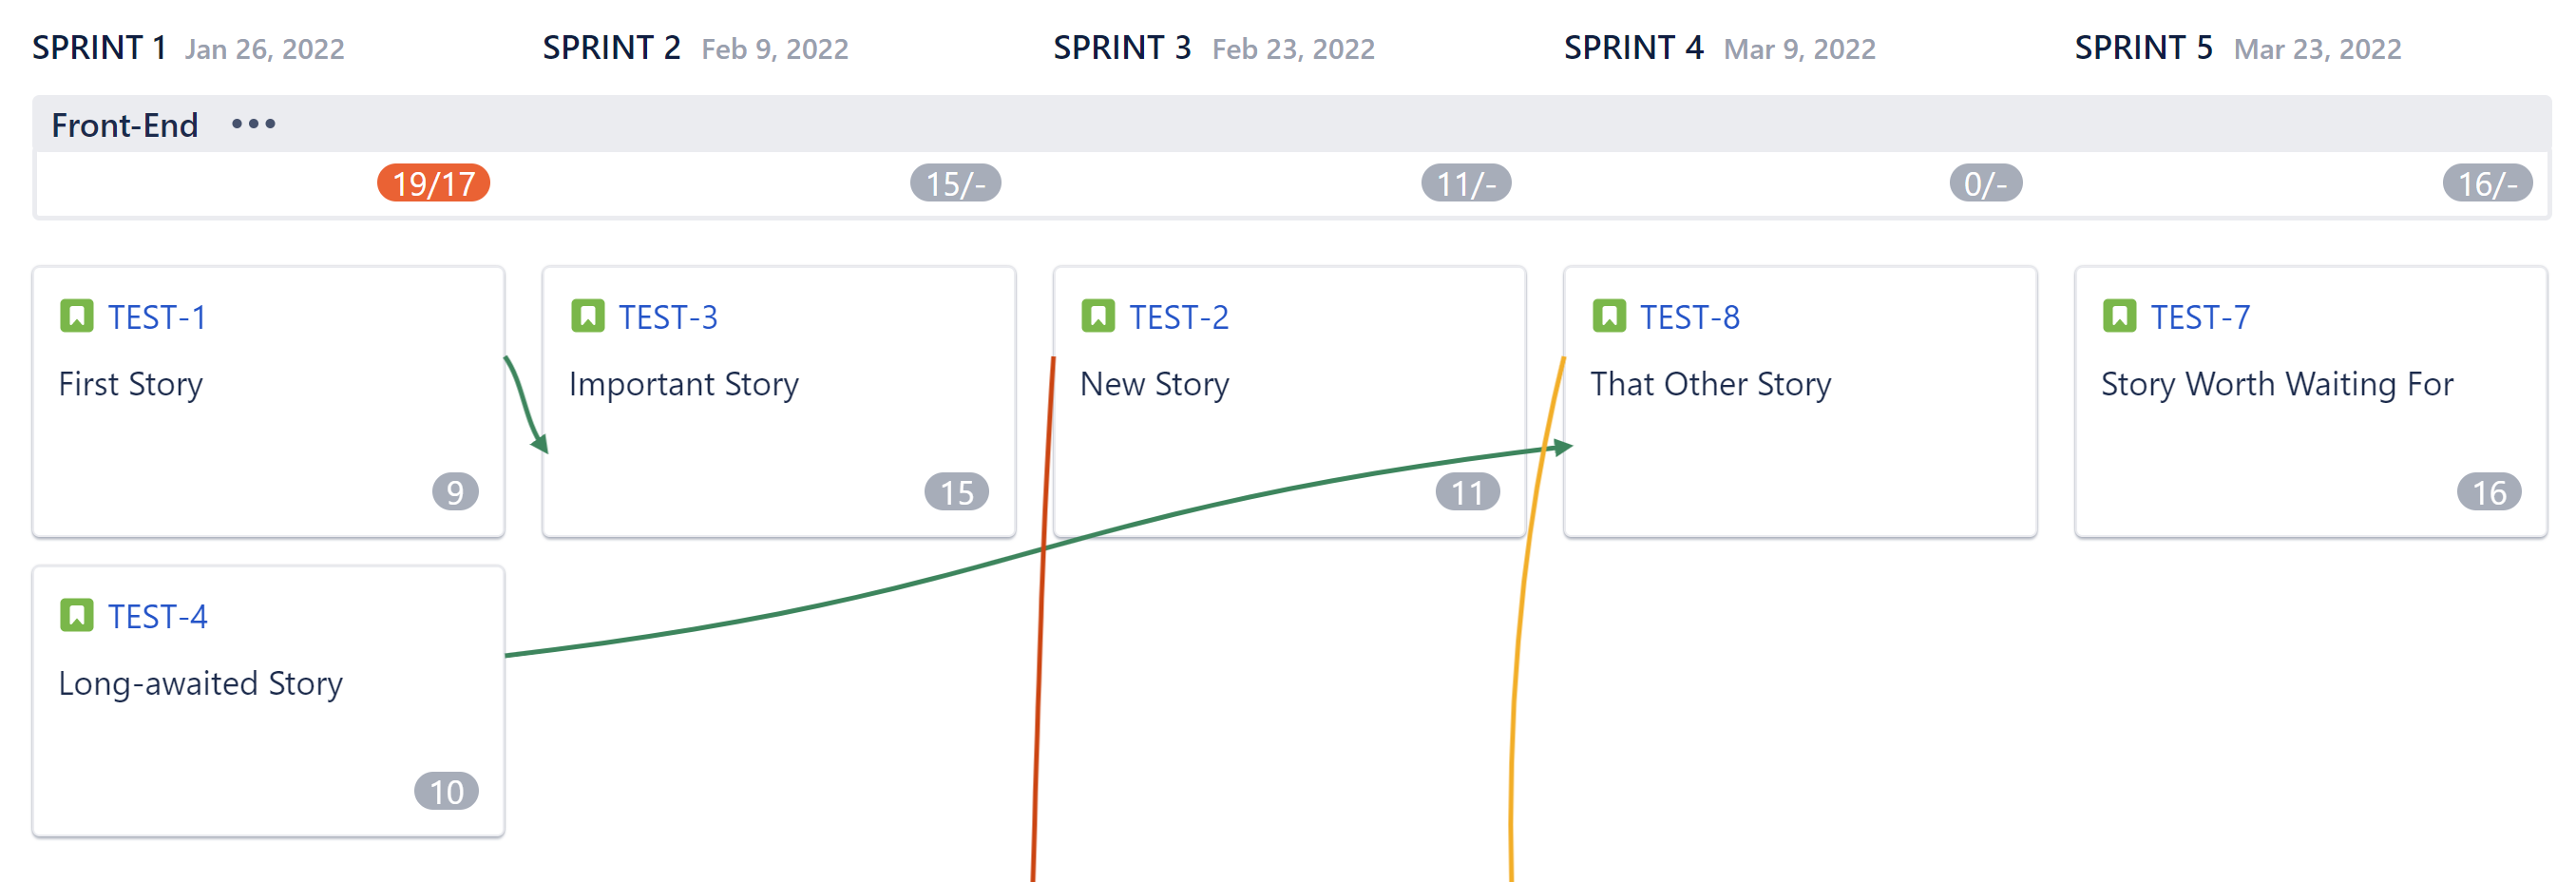 Sprint 1 is over the work estimate limit